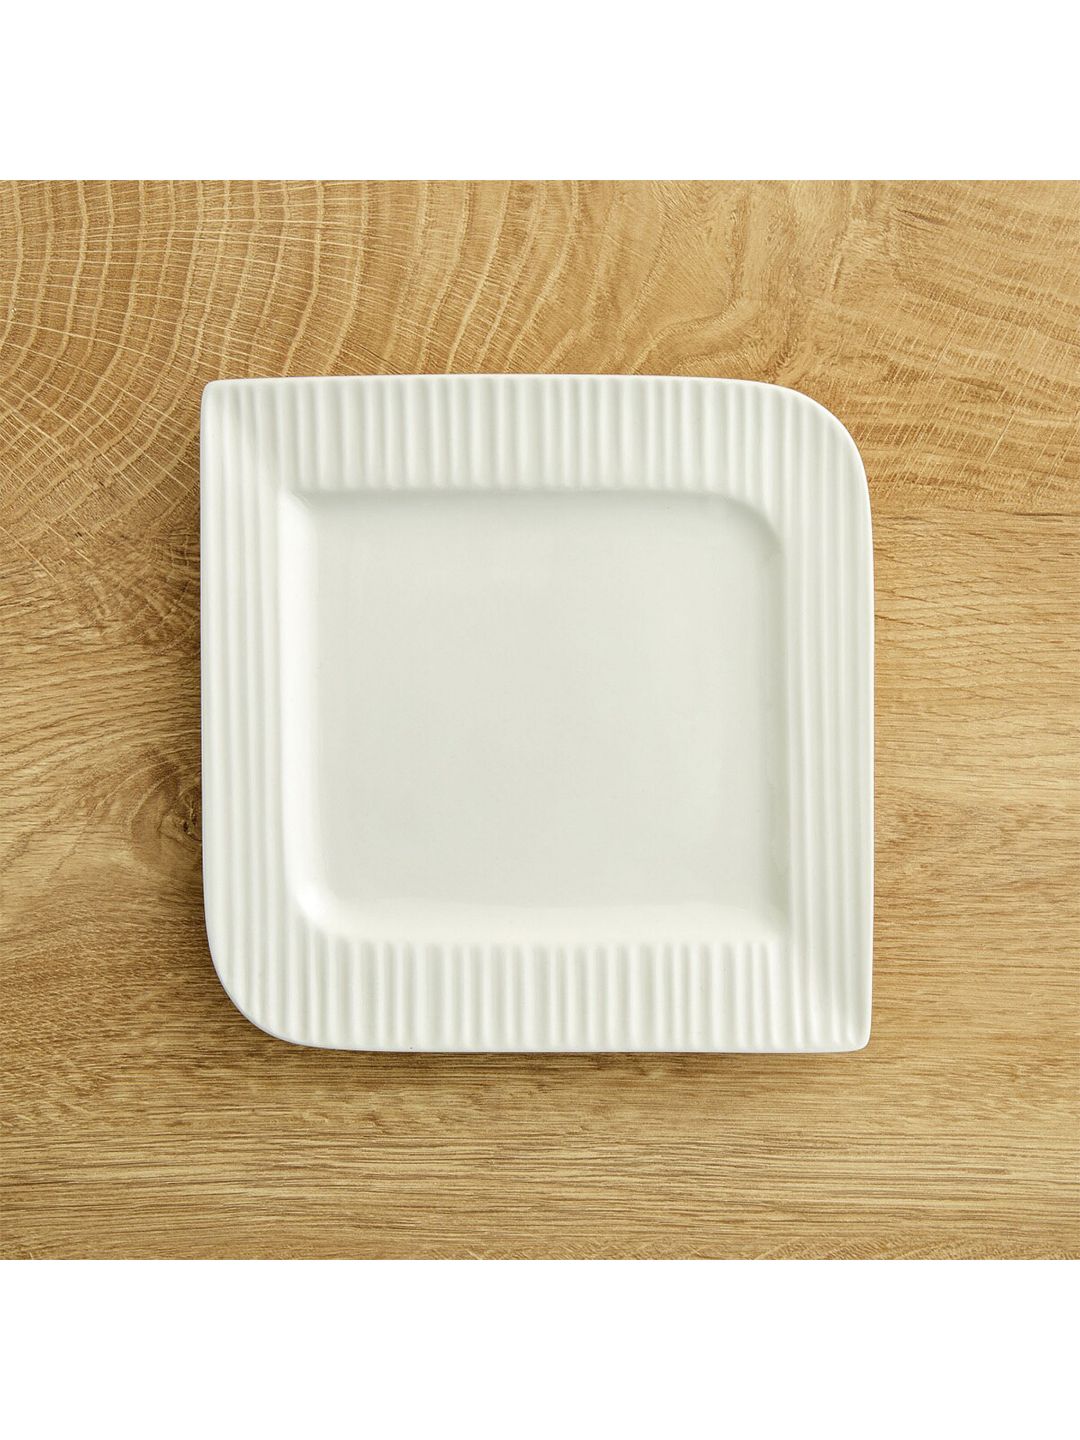 Home Centre White & 1 Pieces Porcelain Glossy Plate Price in India